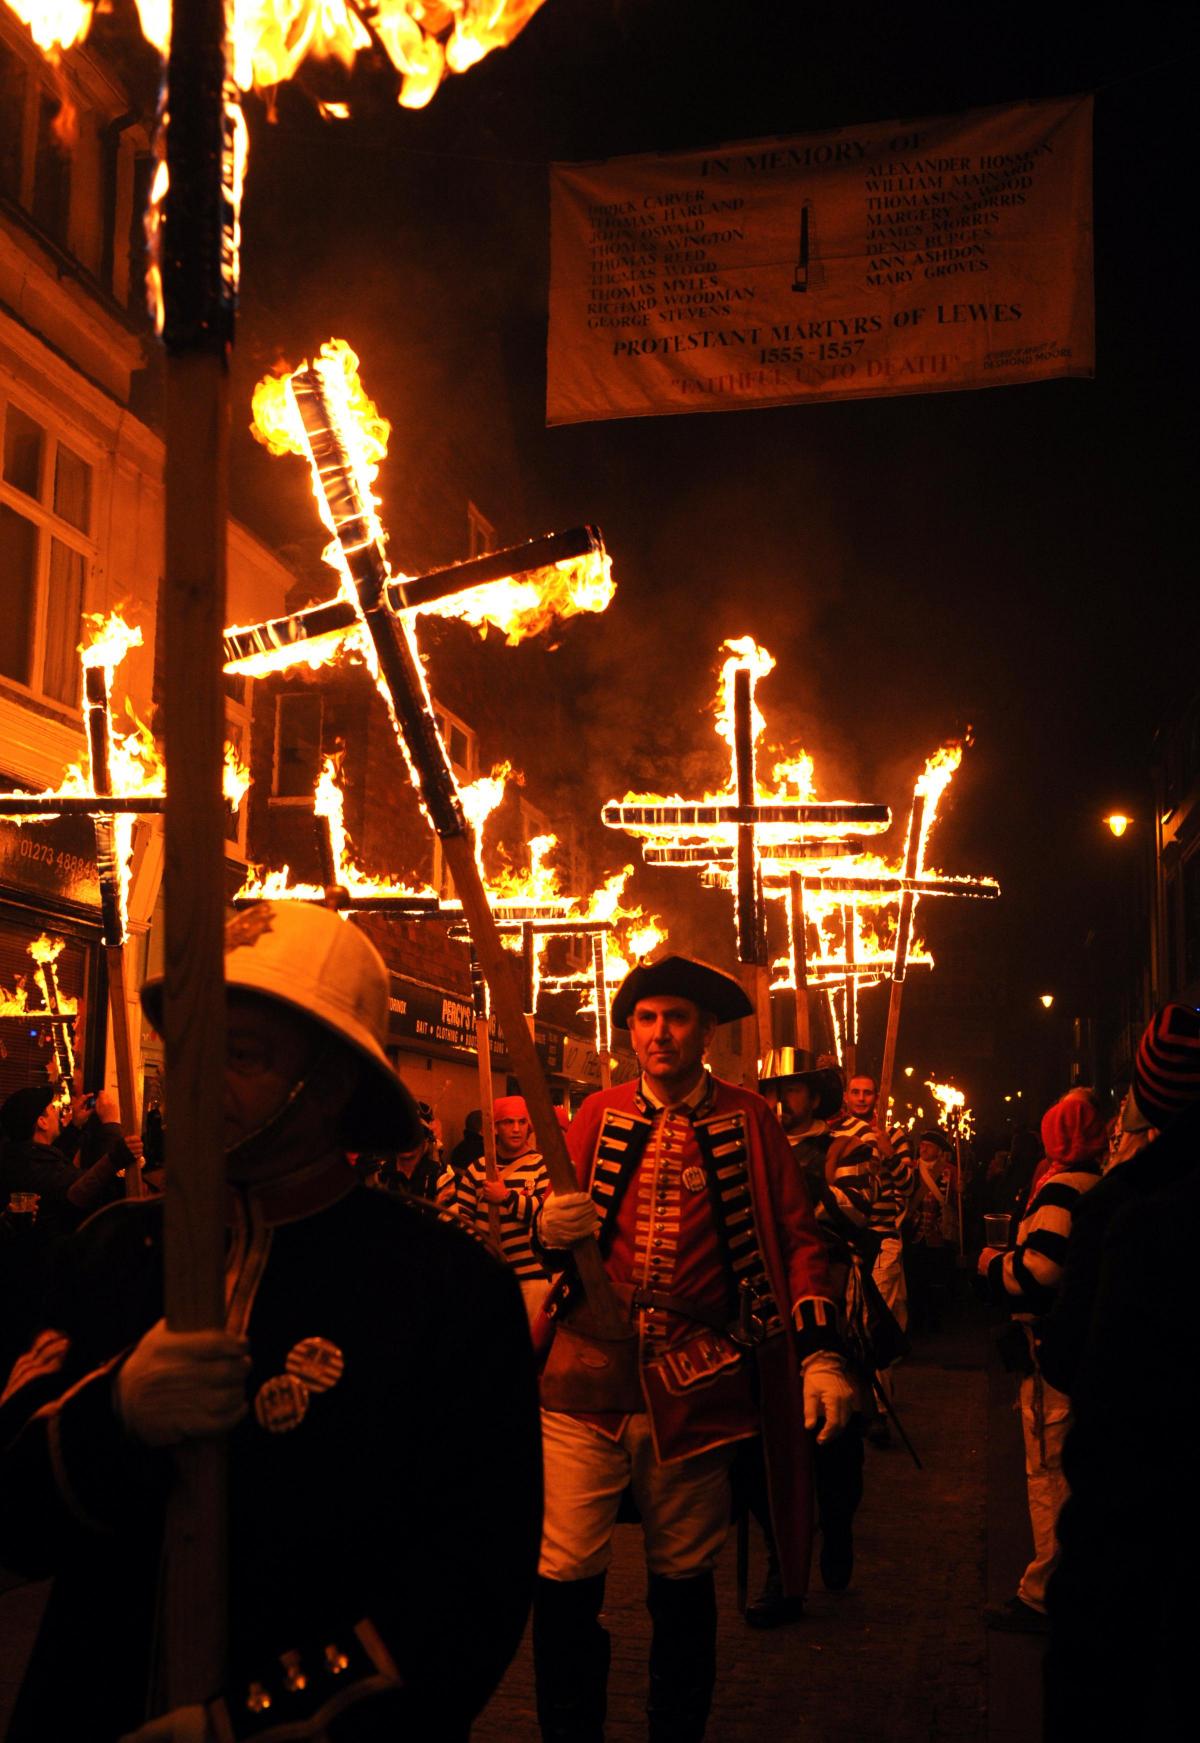 All the fun and spectacle of Lewes Bonfire 2013.